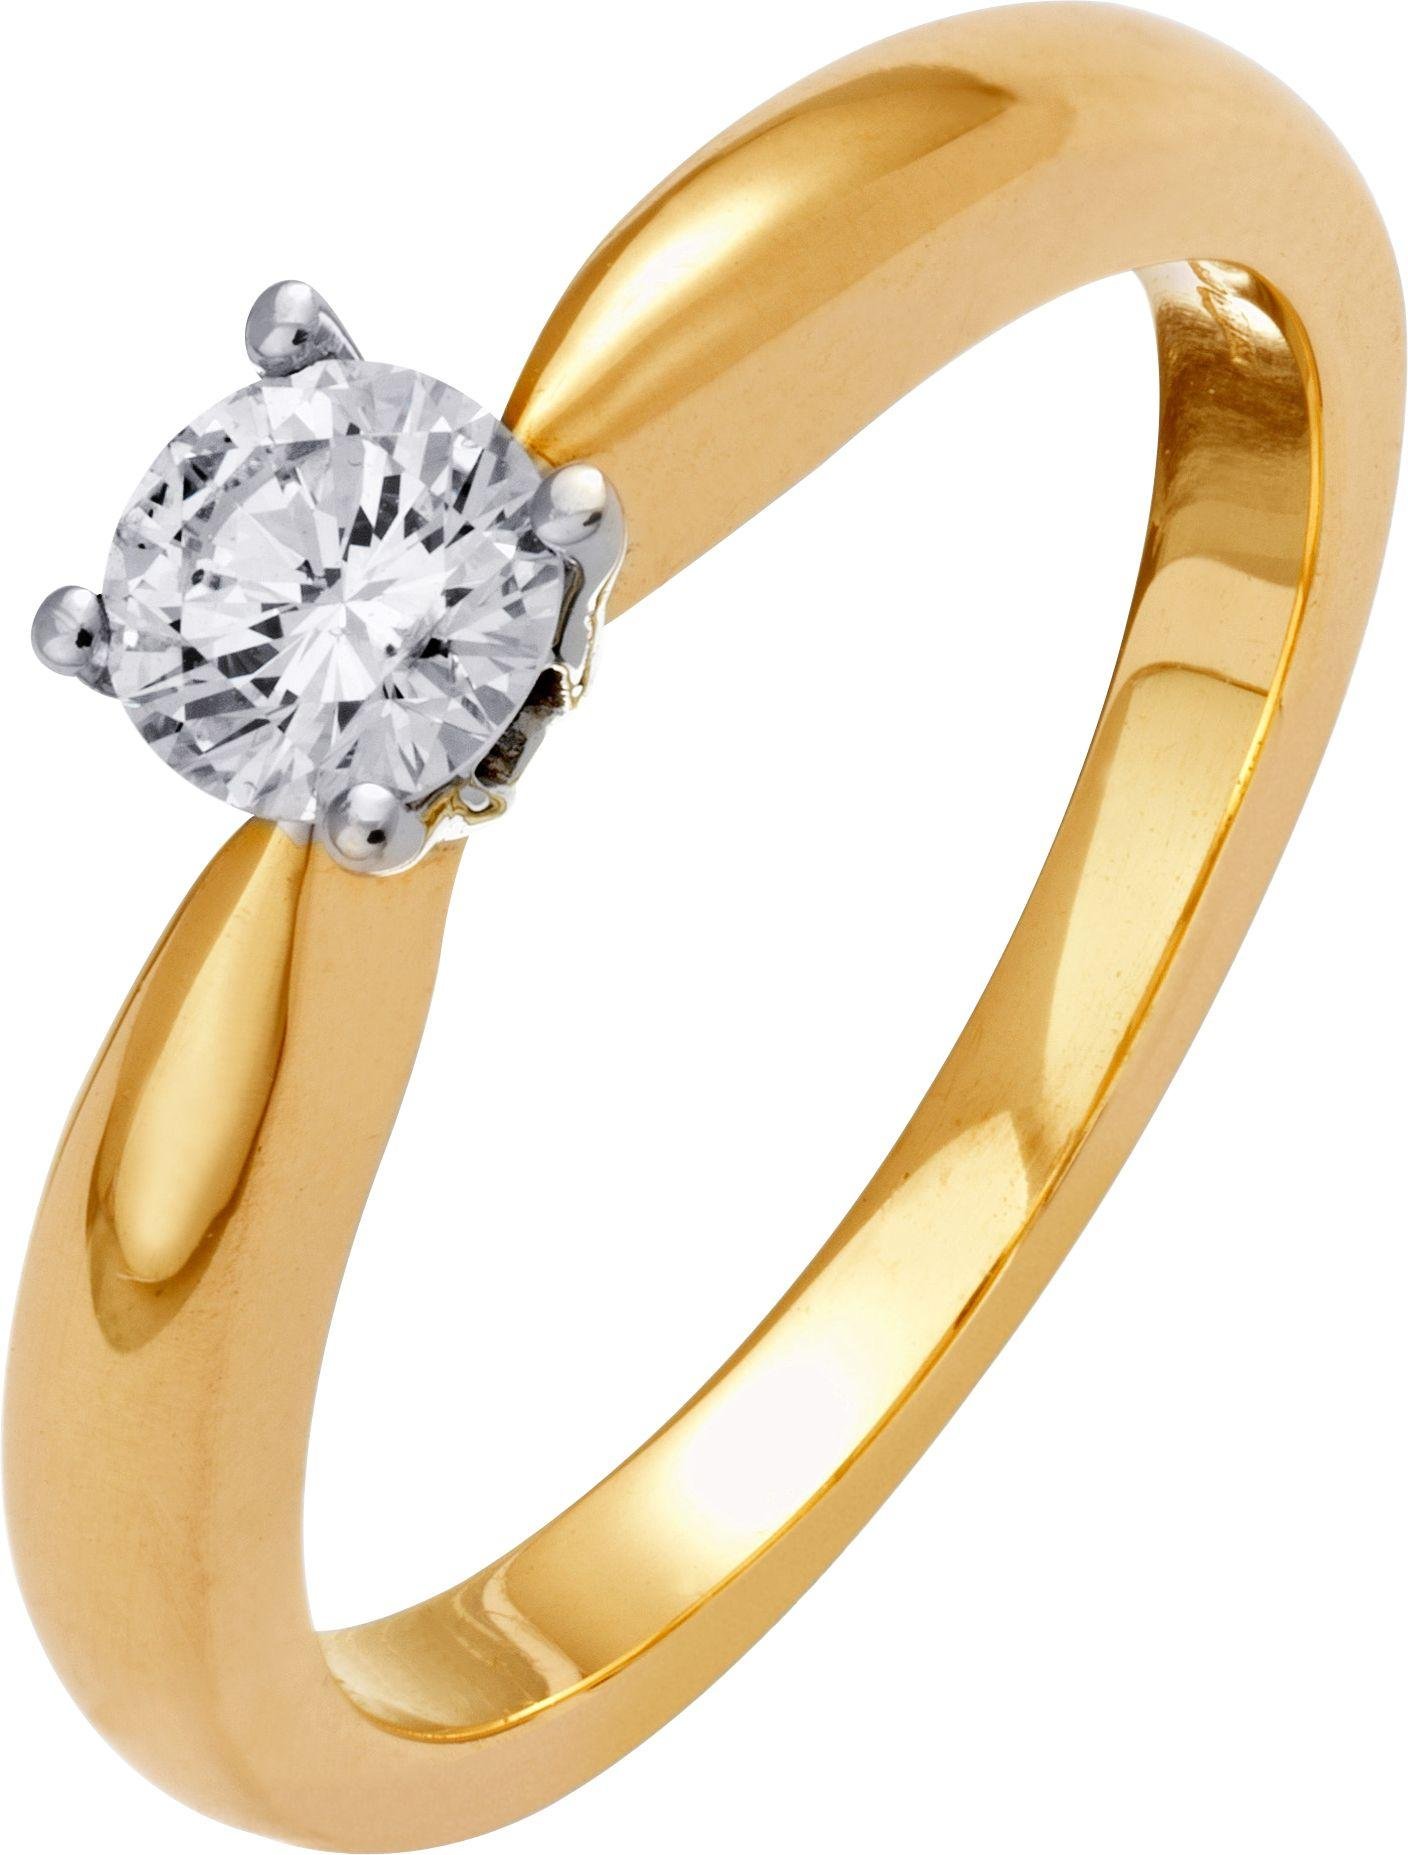 Everlasting Love 9ct Gold 0.33ct Diamond Solitaire Ring -N